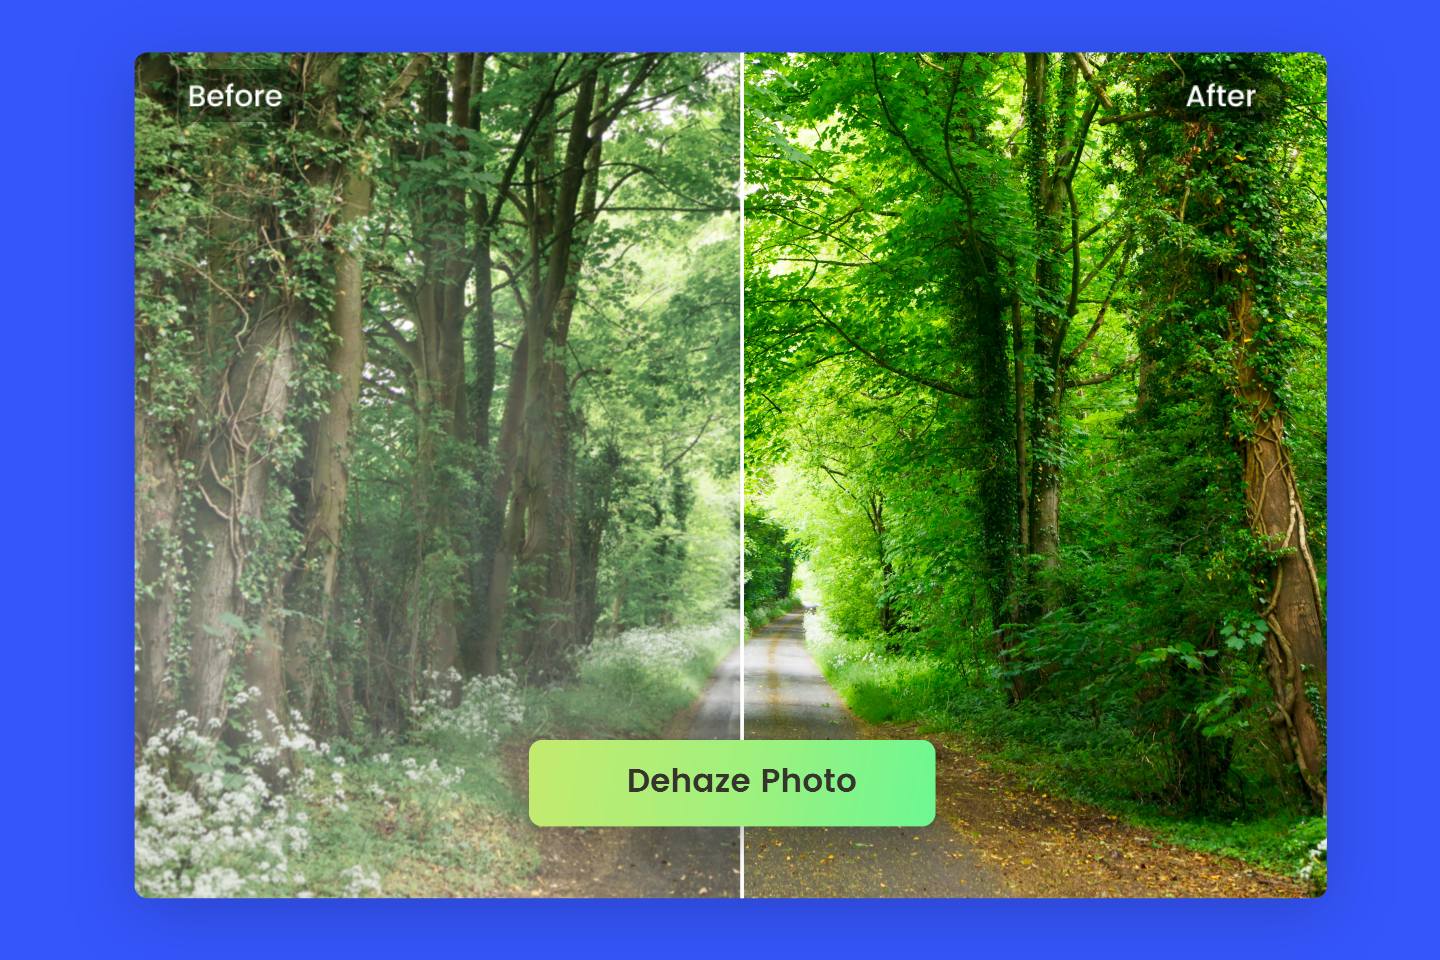 Remove haze from forest photo with fotor ai dehaze tool online